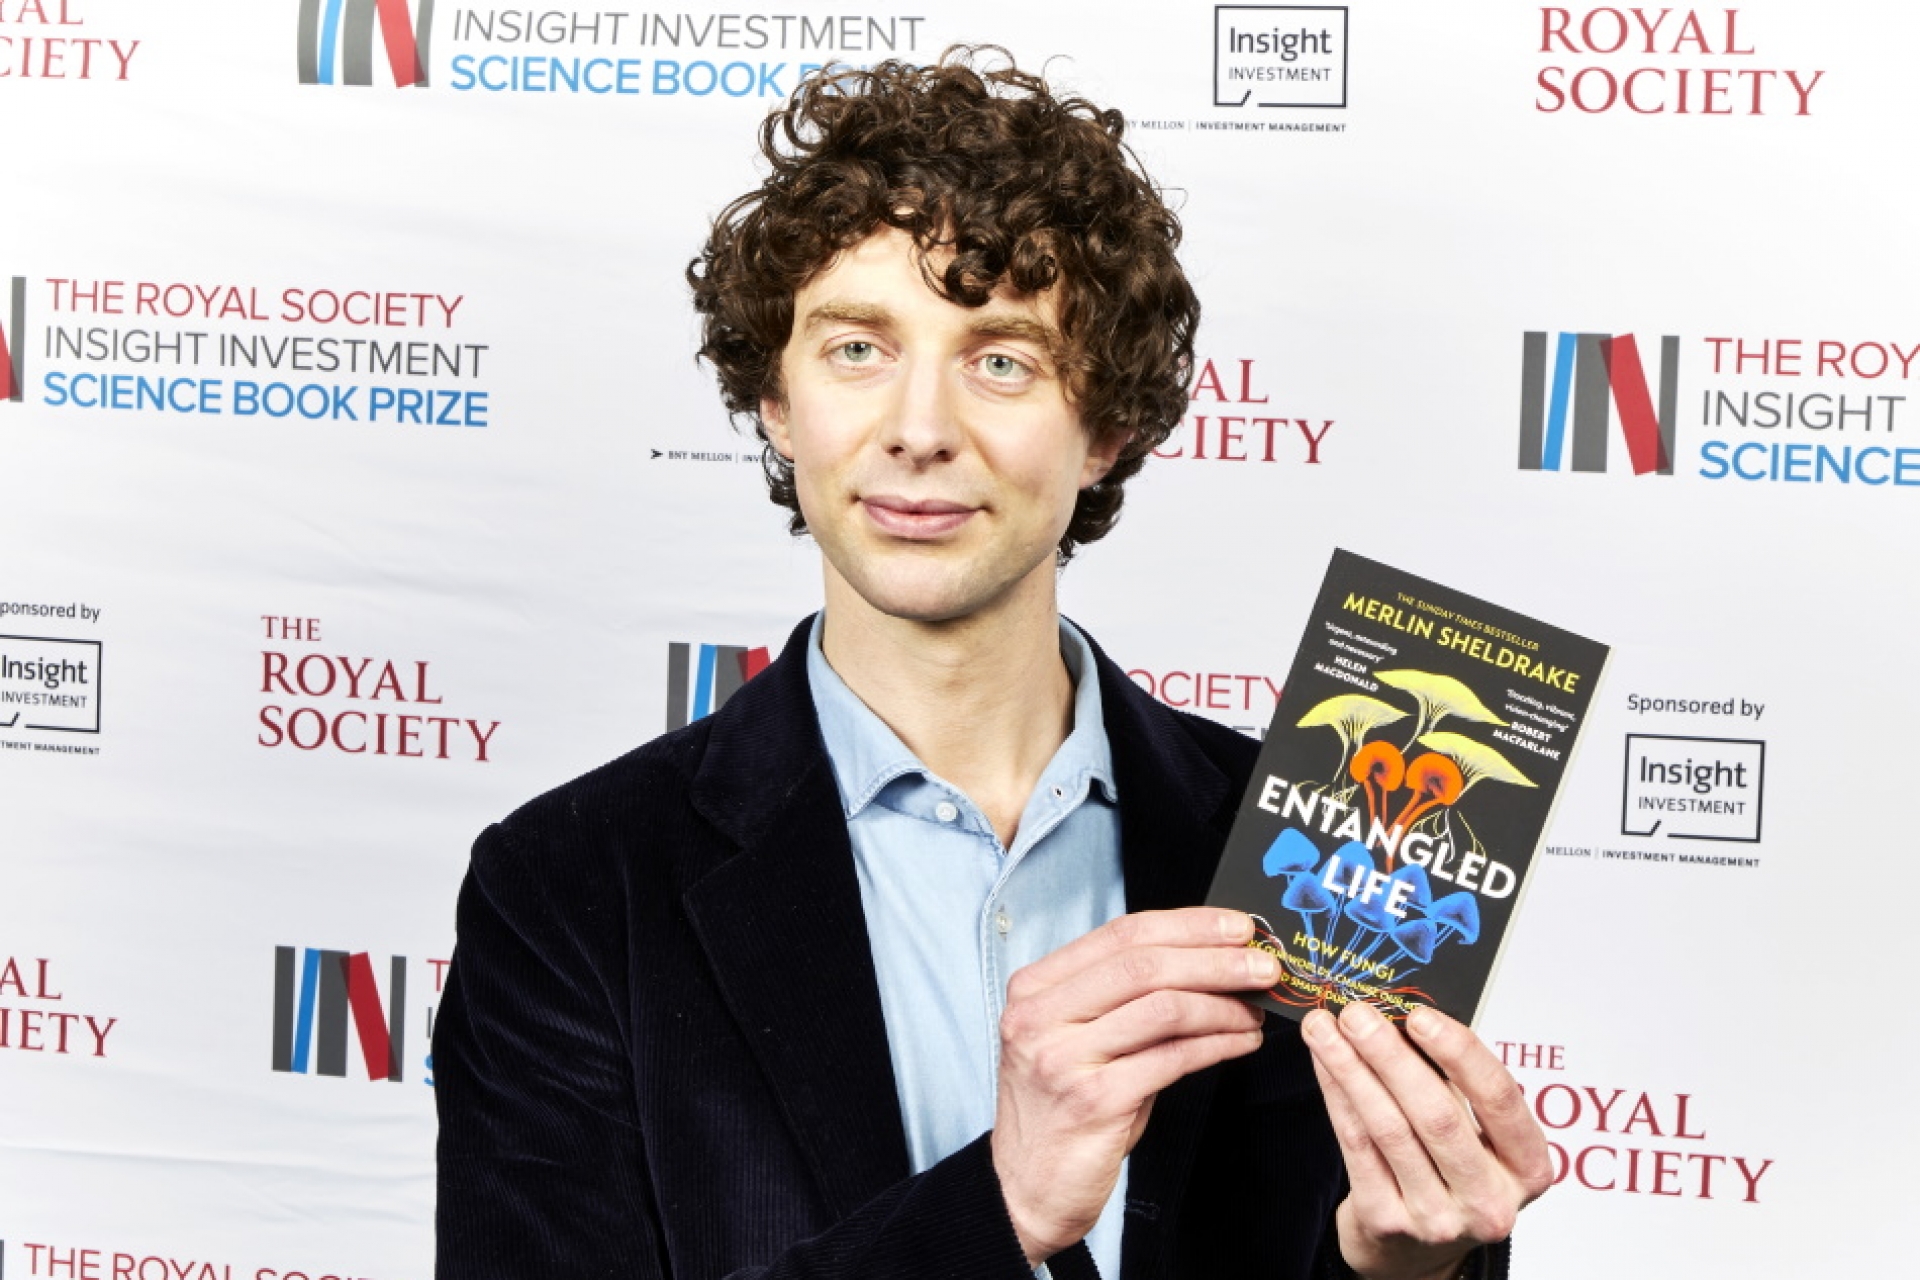 Entangled Life by Merlin Sheldrake wins The Royal Society Science Book Prize 2021